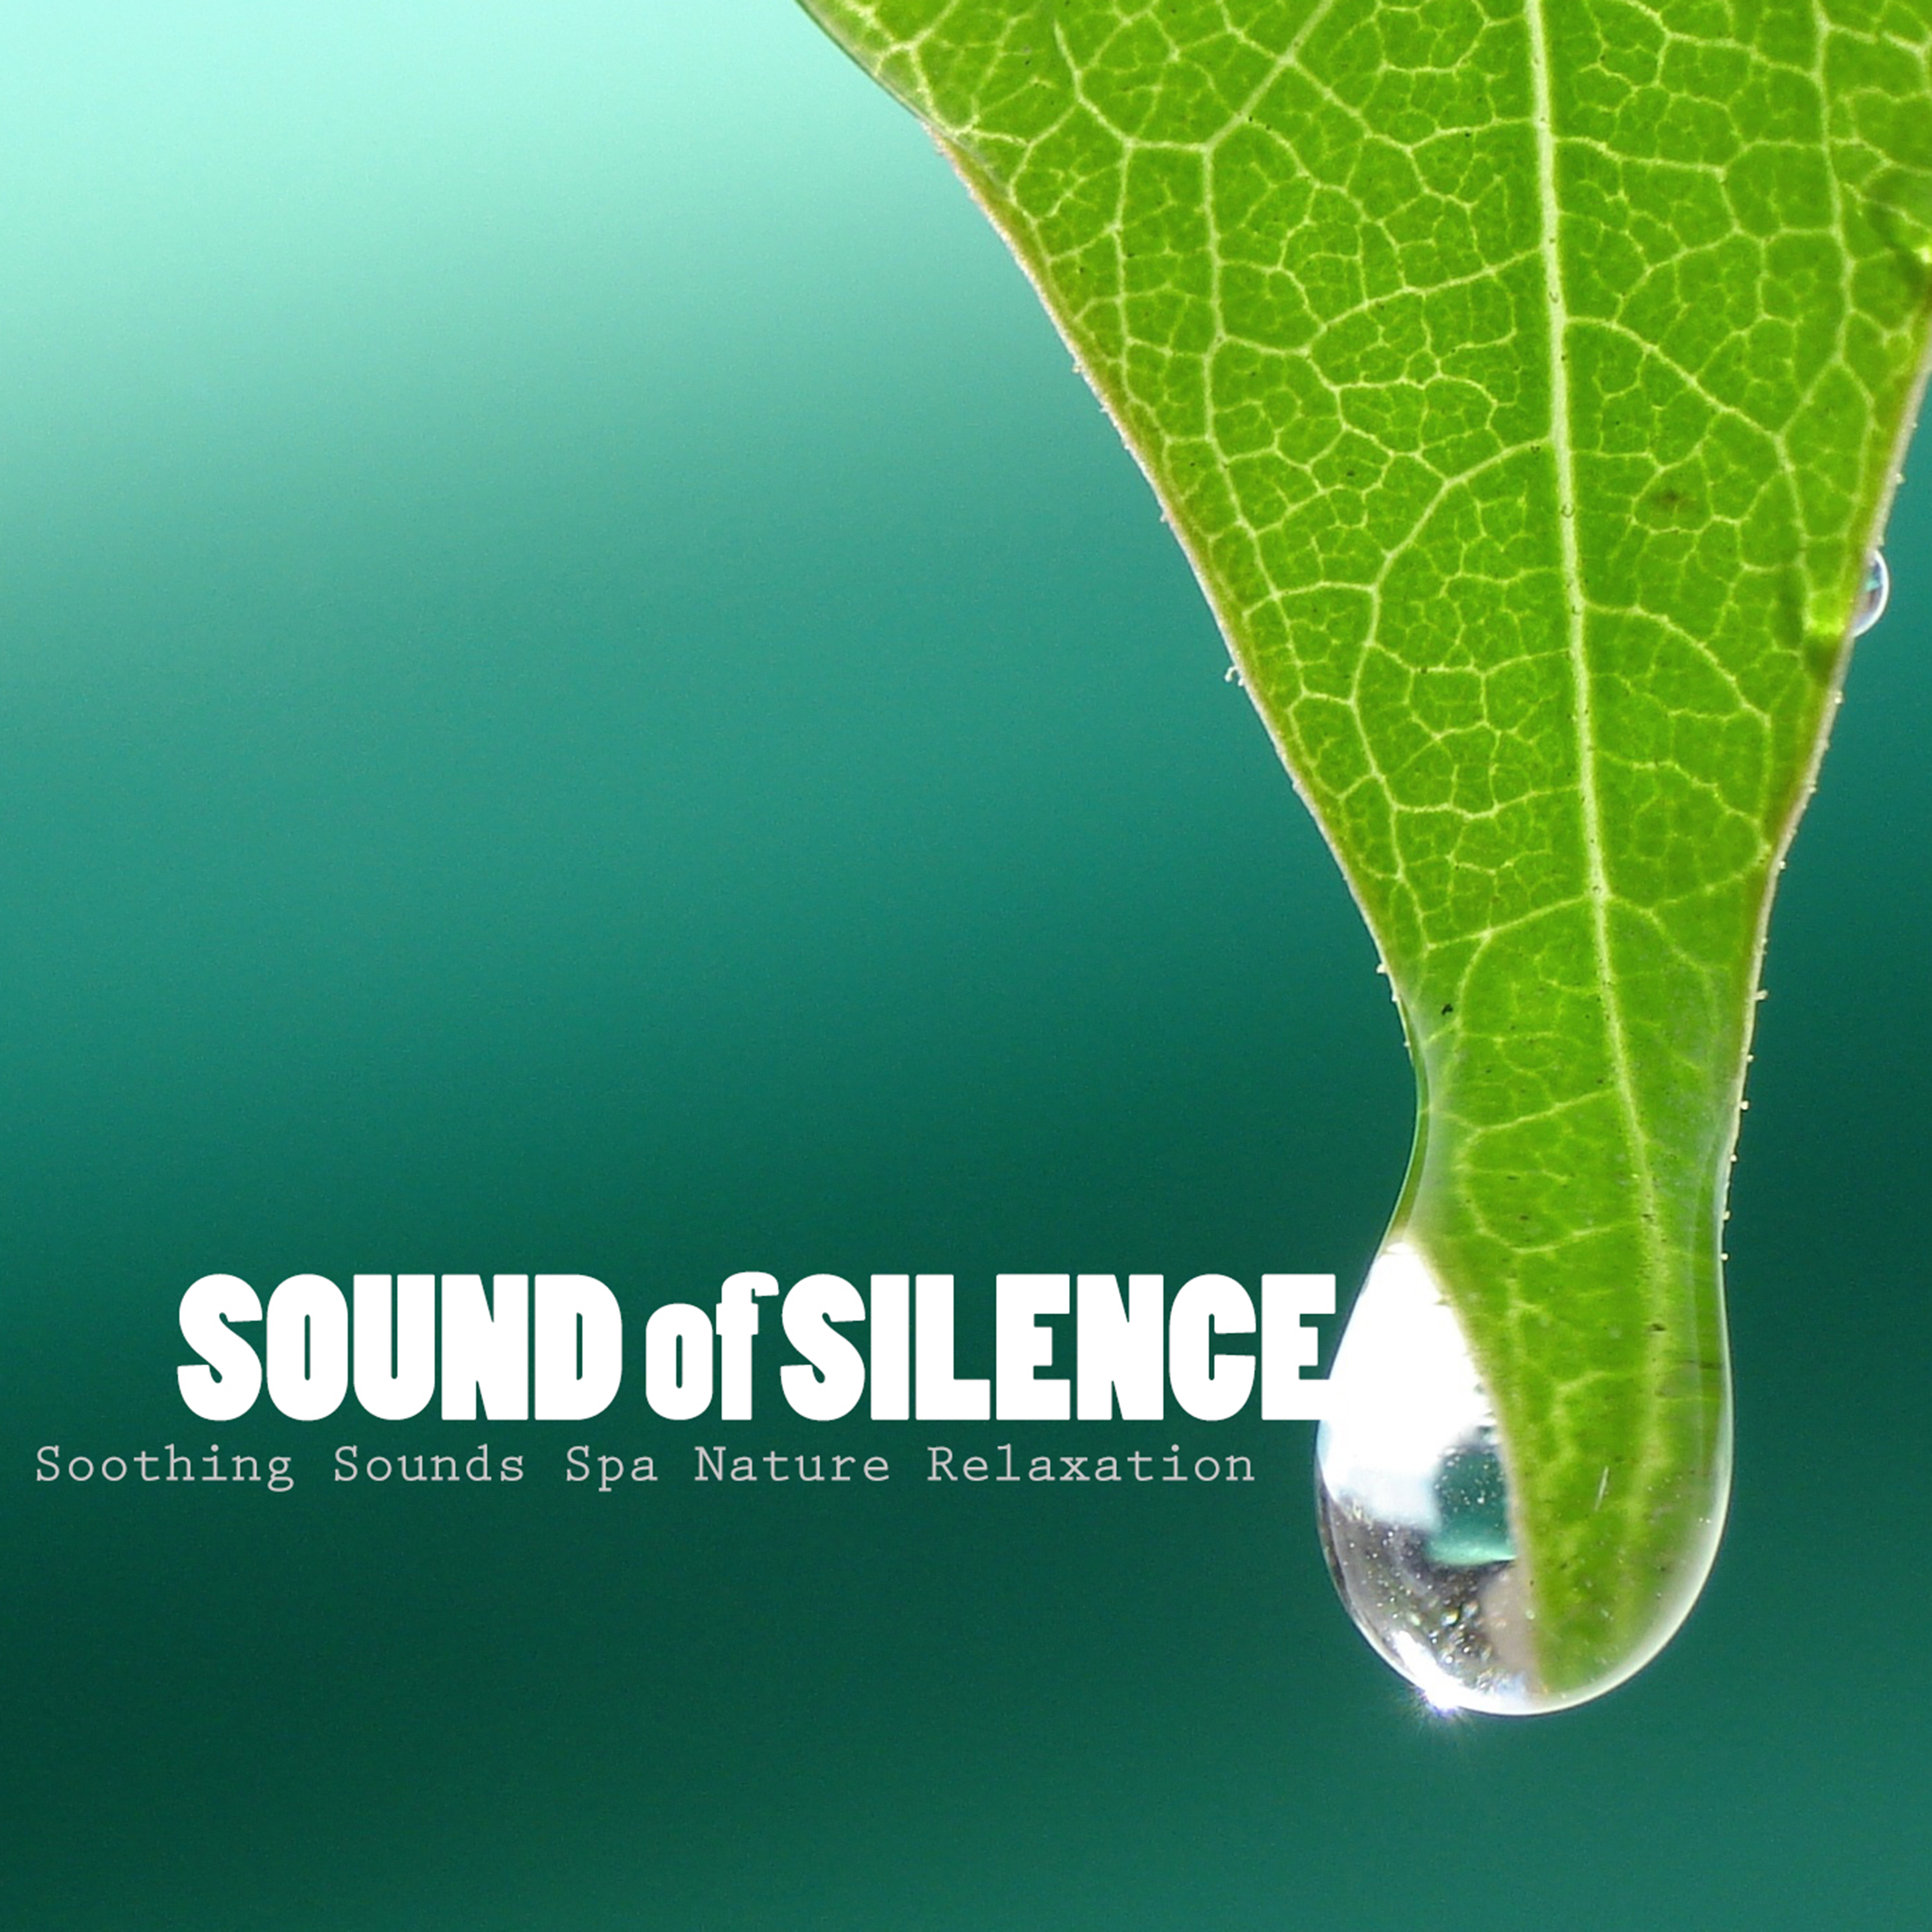 Sound of Silence - Serenity Music, Soothing Sounds Spa Nature Relaxation